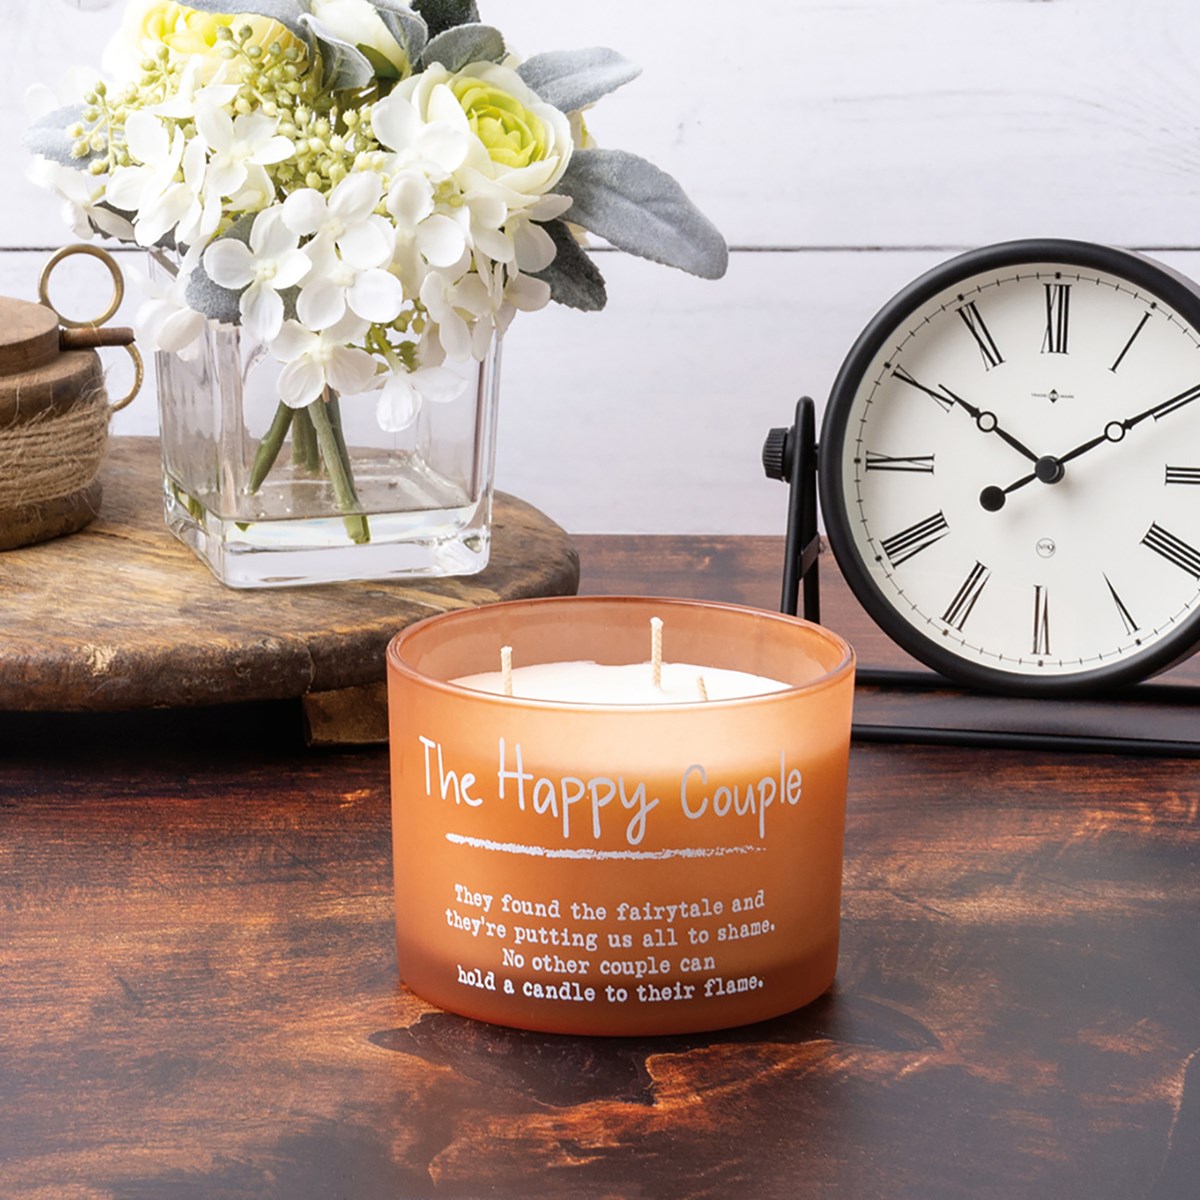 The Happy Couple Jar Candle - Soy Wax, Glass, Cotton